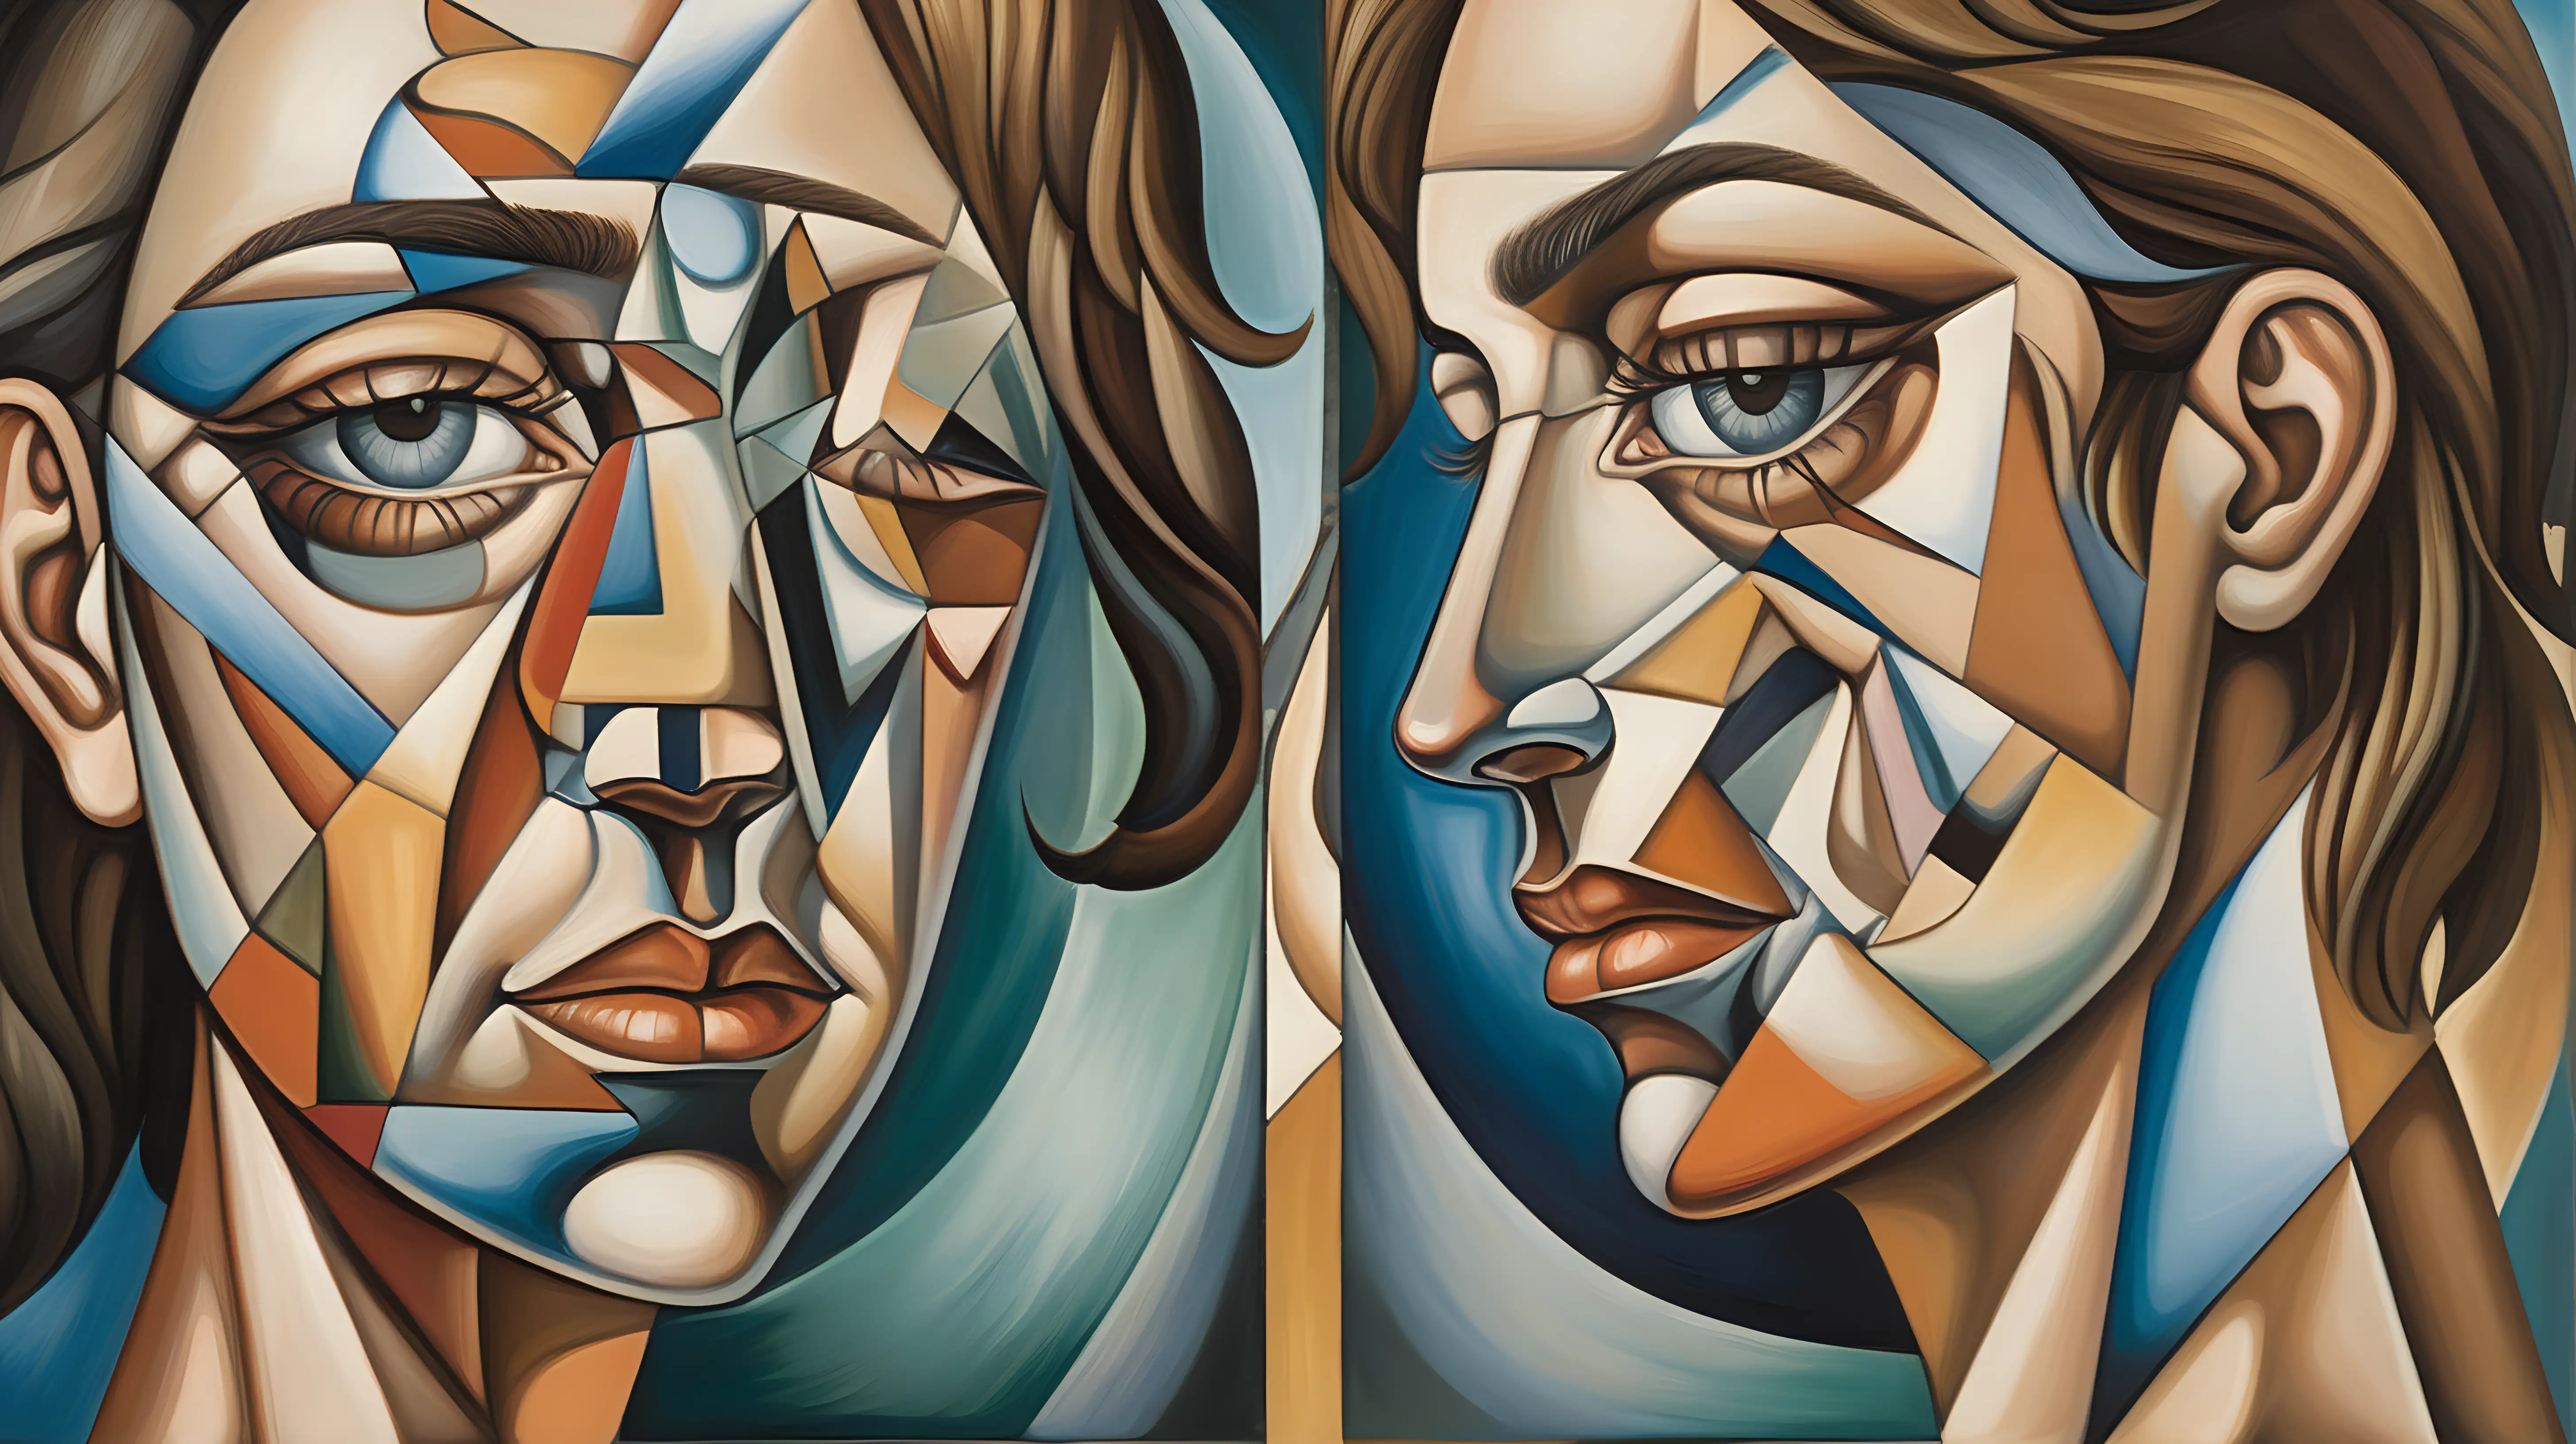 Cubist SelfPortraits Exploring Identity and SelfDiscovery